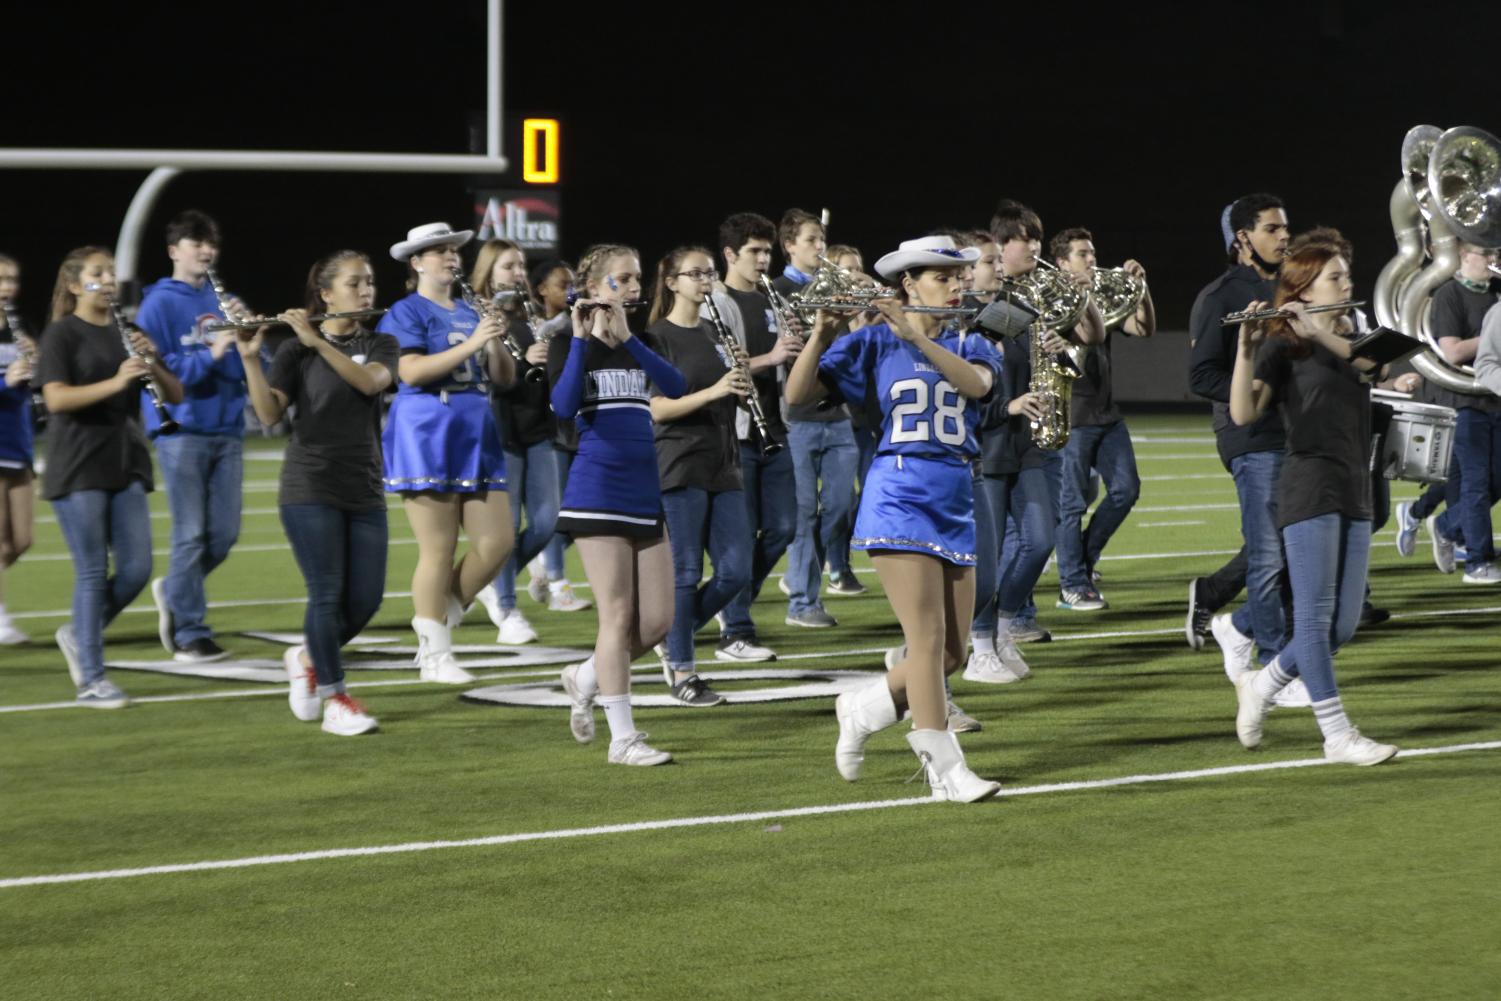 The Pride of Lindale marches at the game against Chapel Hill.  The band will compete at the state military contest on Wednesday, December 9.